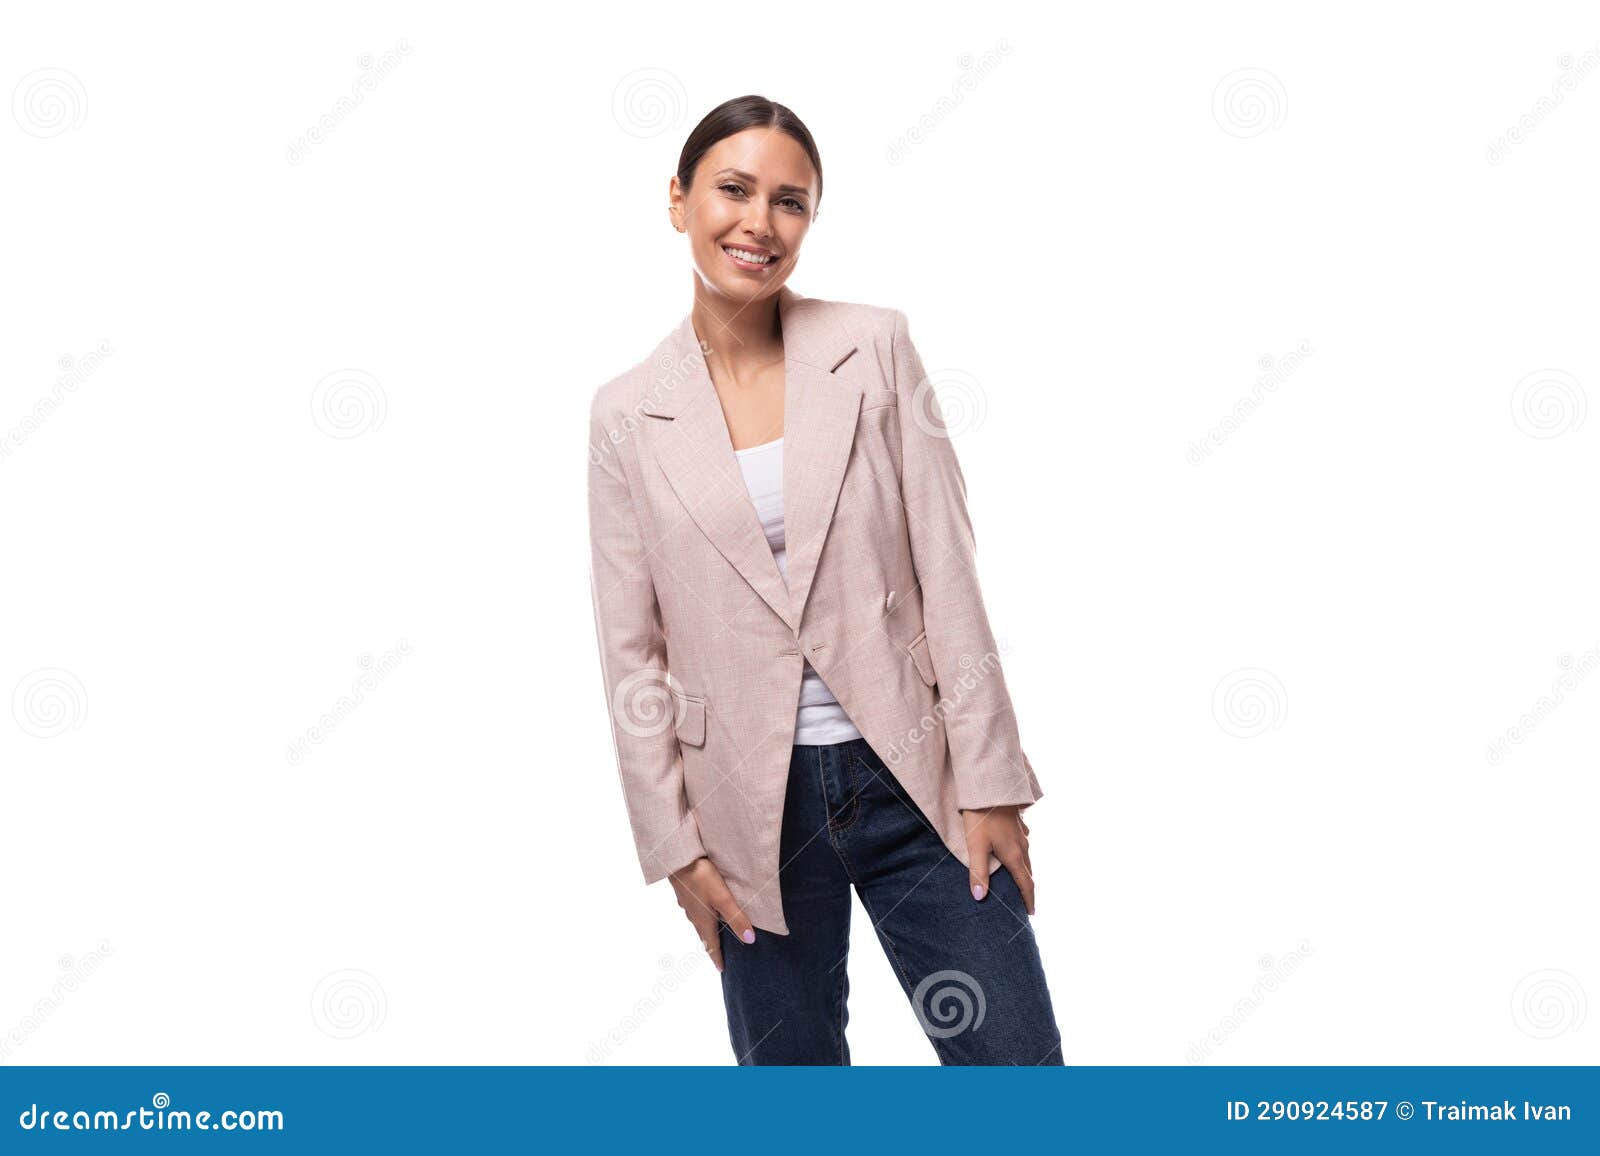 Young Successful Business Woman with a Ponytail Hairstyle is Dressed in ...